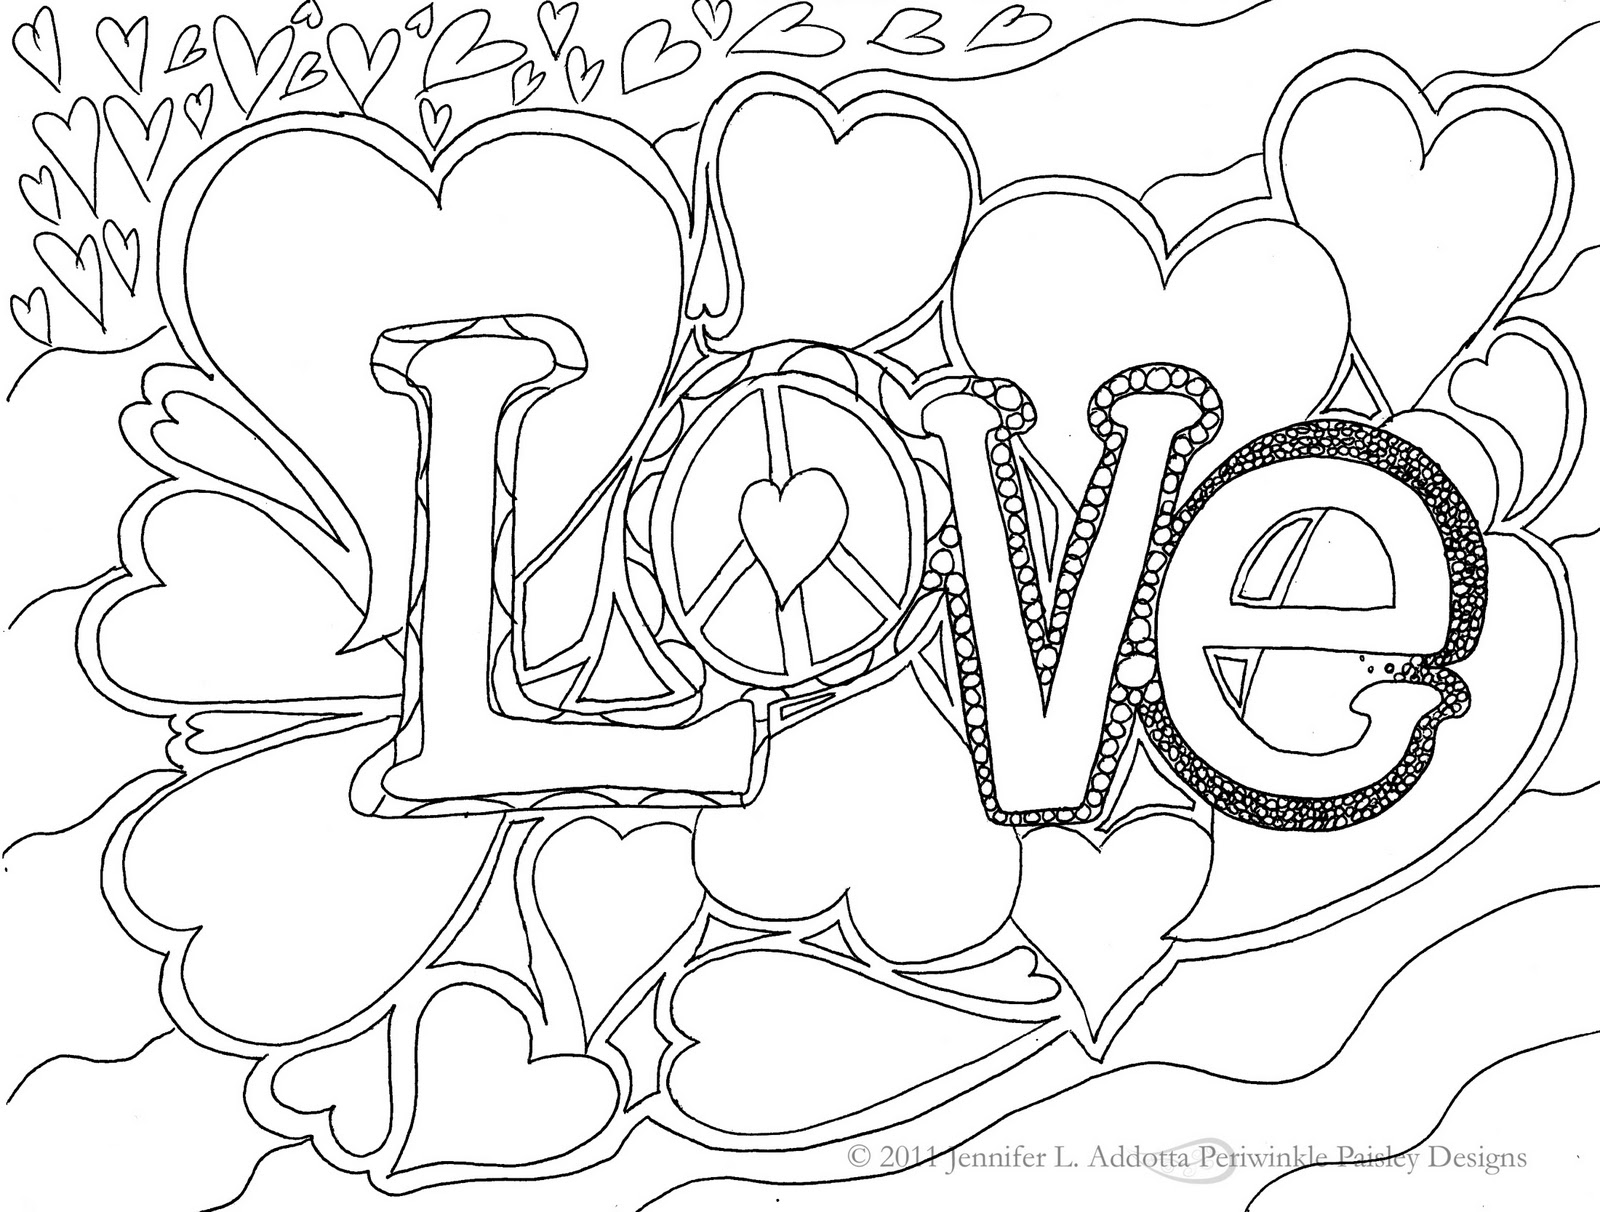 I love you coloring pages to download and print for free